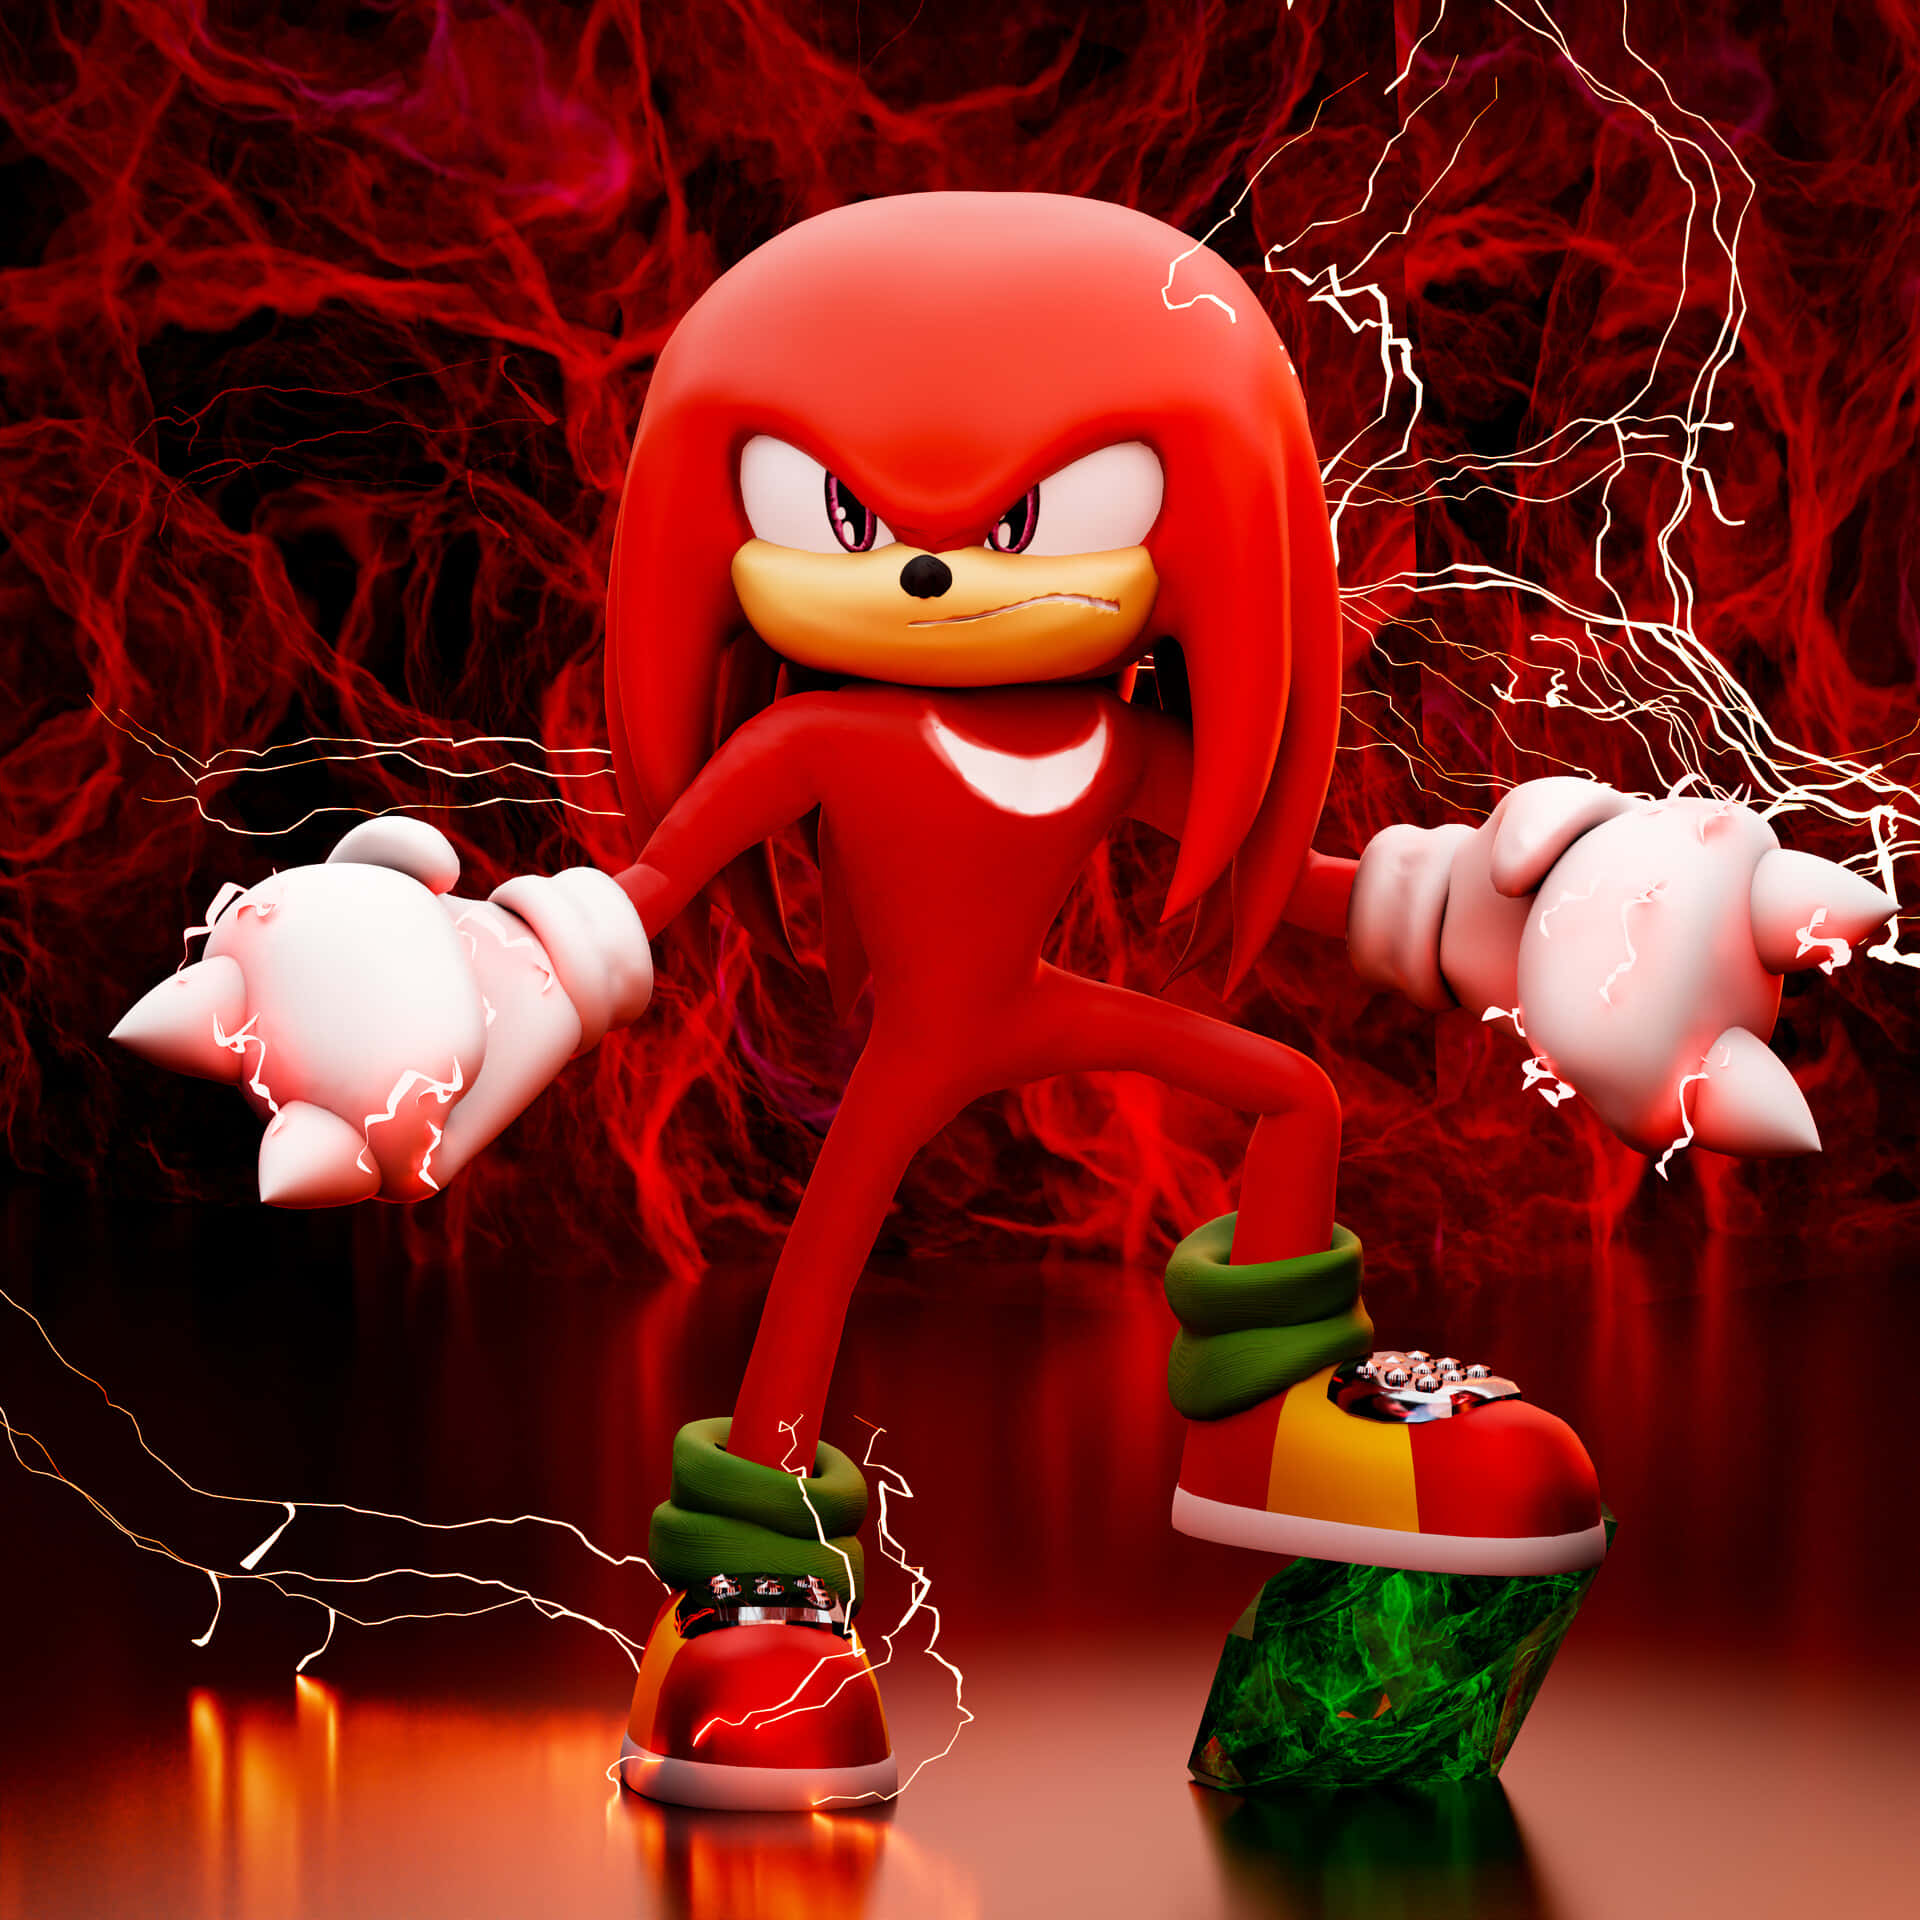 Knuckles The Echidna Stepping On Emerald